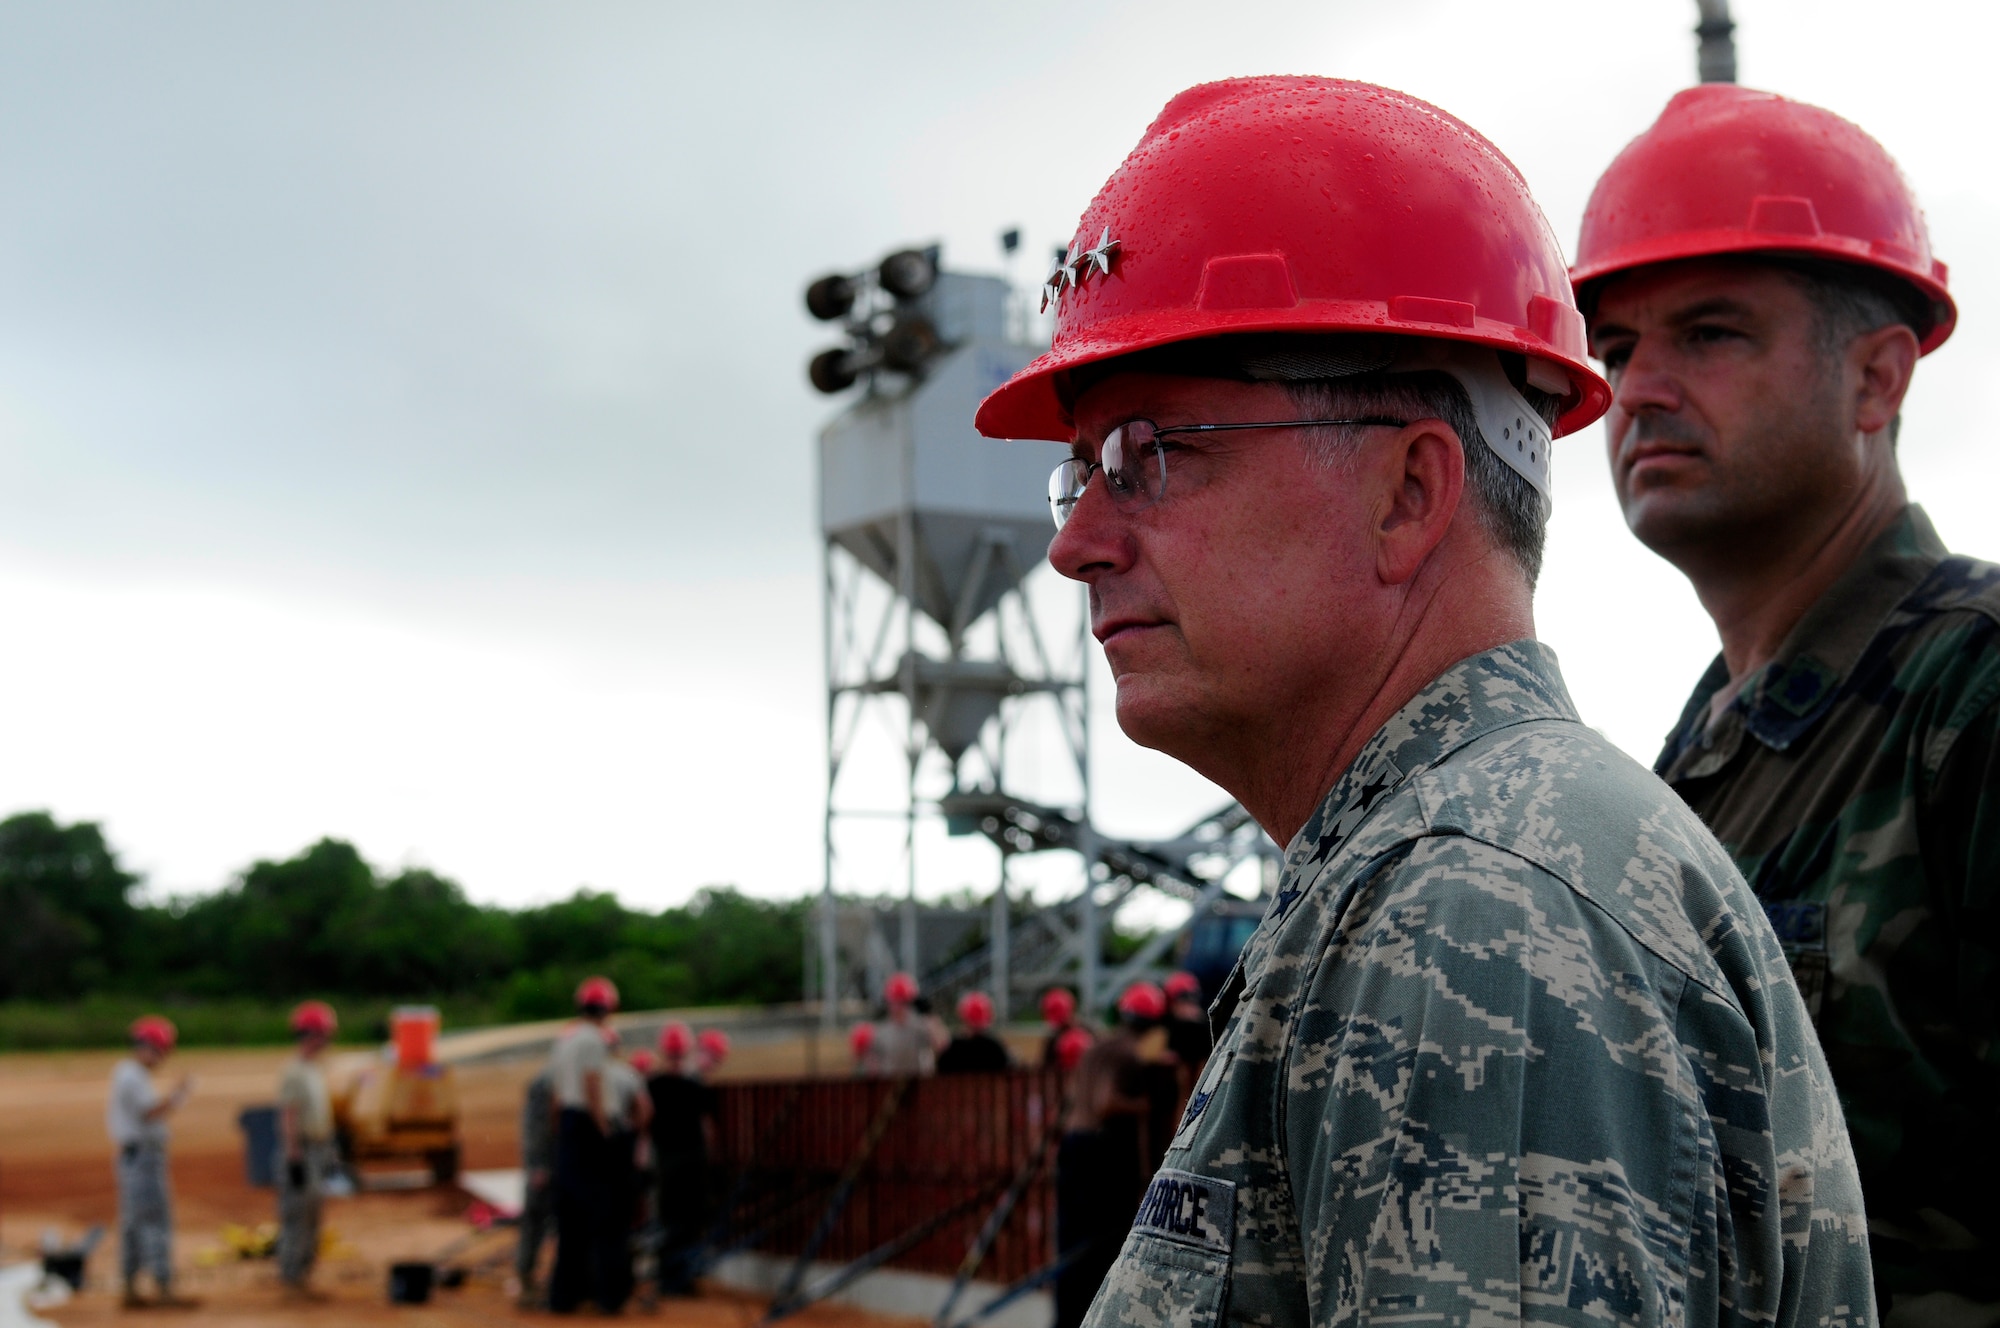 ANDERSEN AIR FORCE BASE, Guam - Lt. Gen. Chip Utterback, 13th Air Force Commander, observes the 554th RED HORSE operations during his tour out at Northwest field April 22. General Utterback was shown the progress that has been made over the past three years with the opening of Commando Warrior Facility to several structures that are close to completion. (U.S. Air Force photo by Airman 1st Class Courtney Witt)